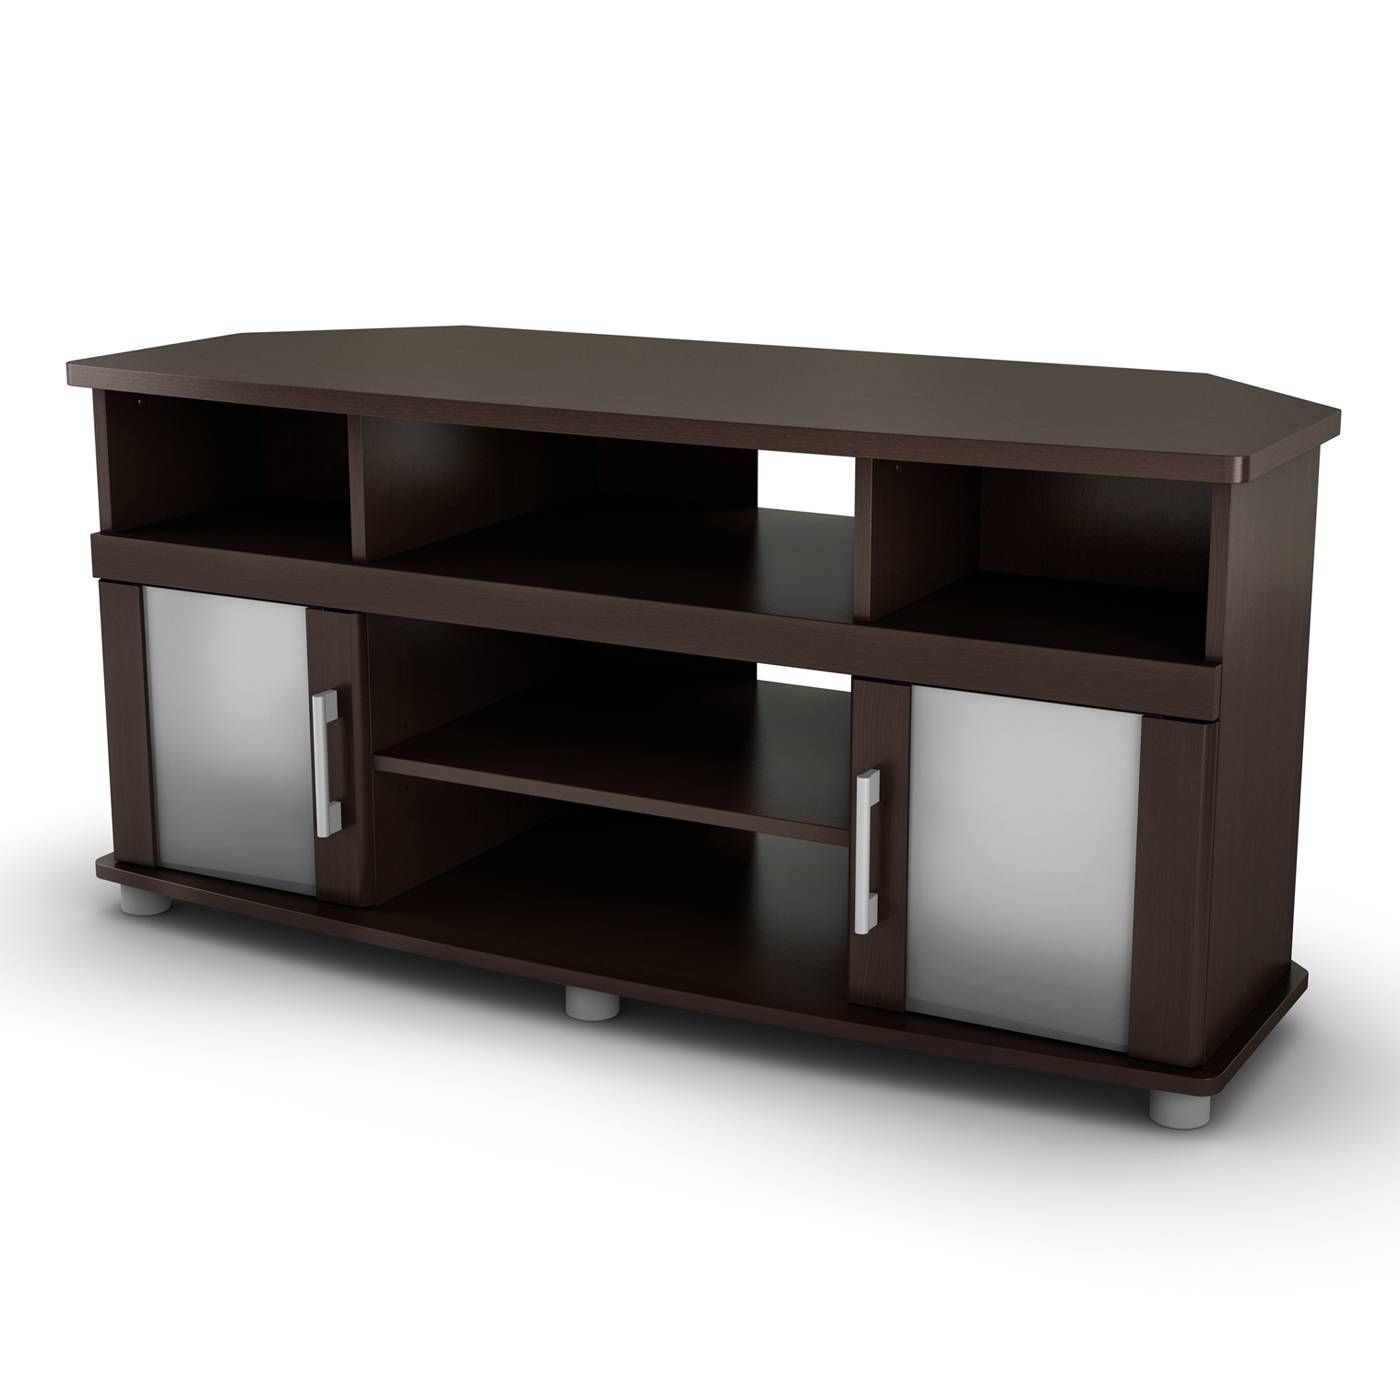 South Shore Furniture City Life Corner Tv Stand | Lowe's Canada Throughout Tv Stands For Corner (View 12 of 15)